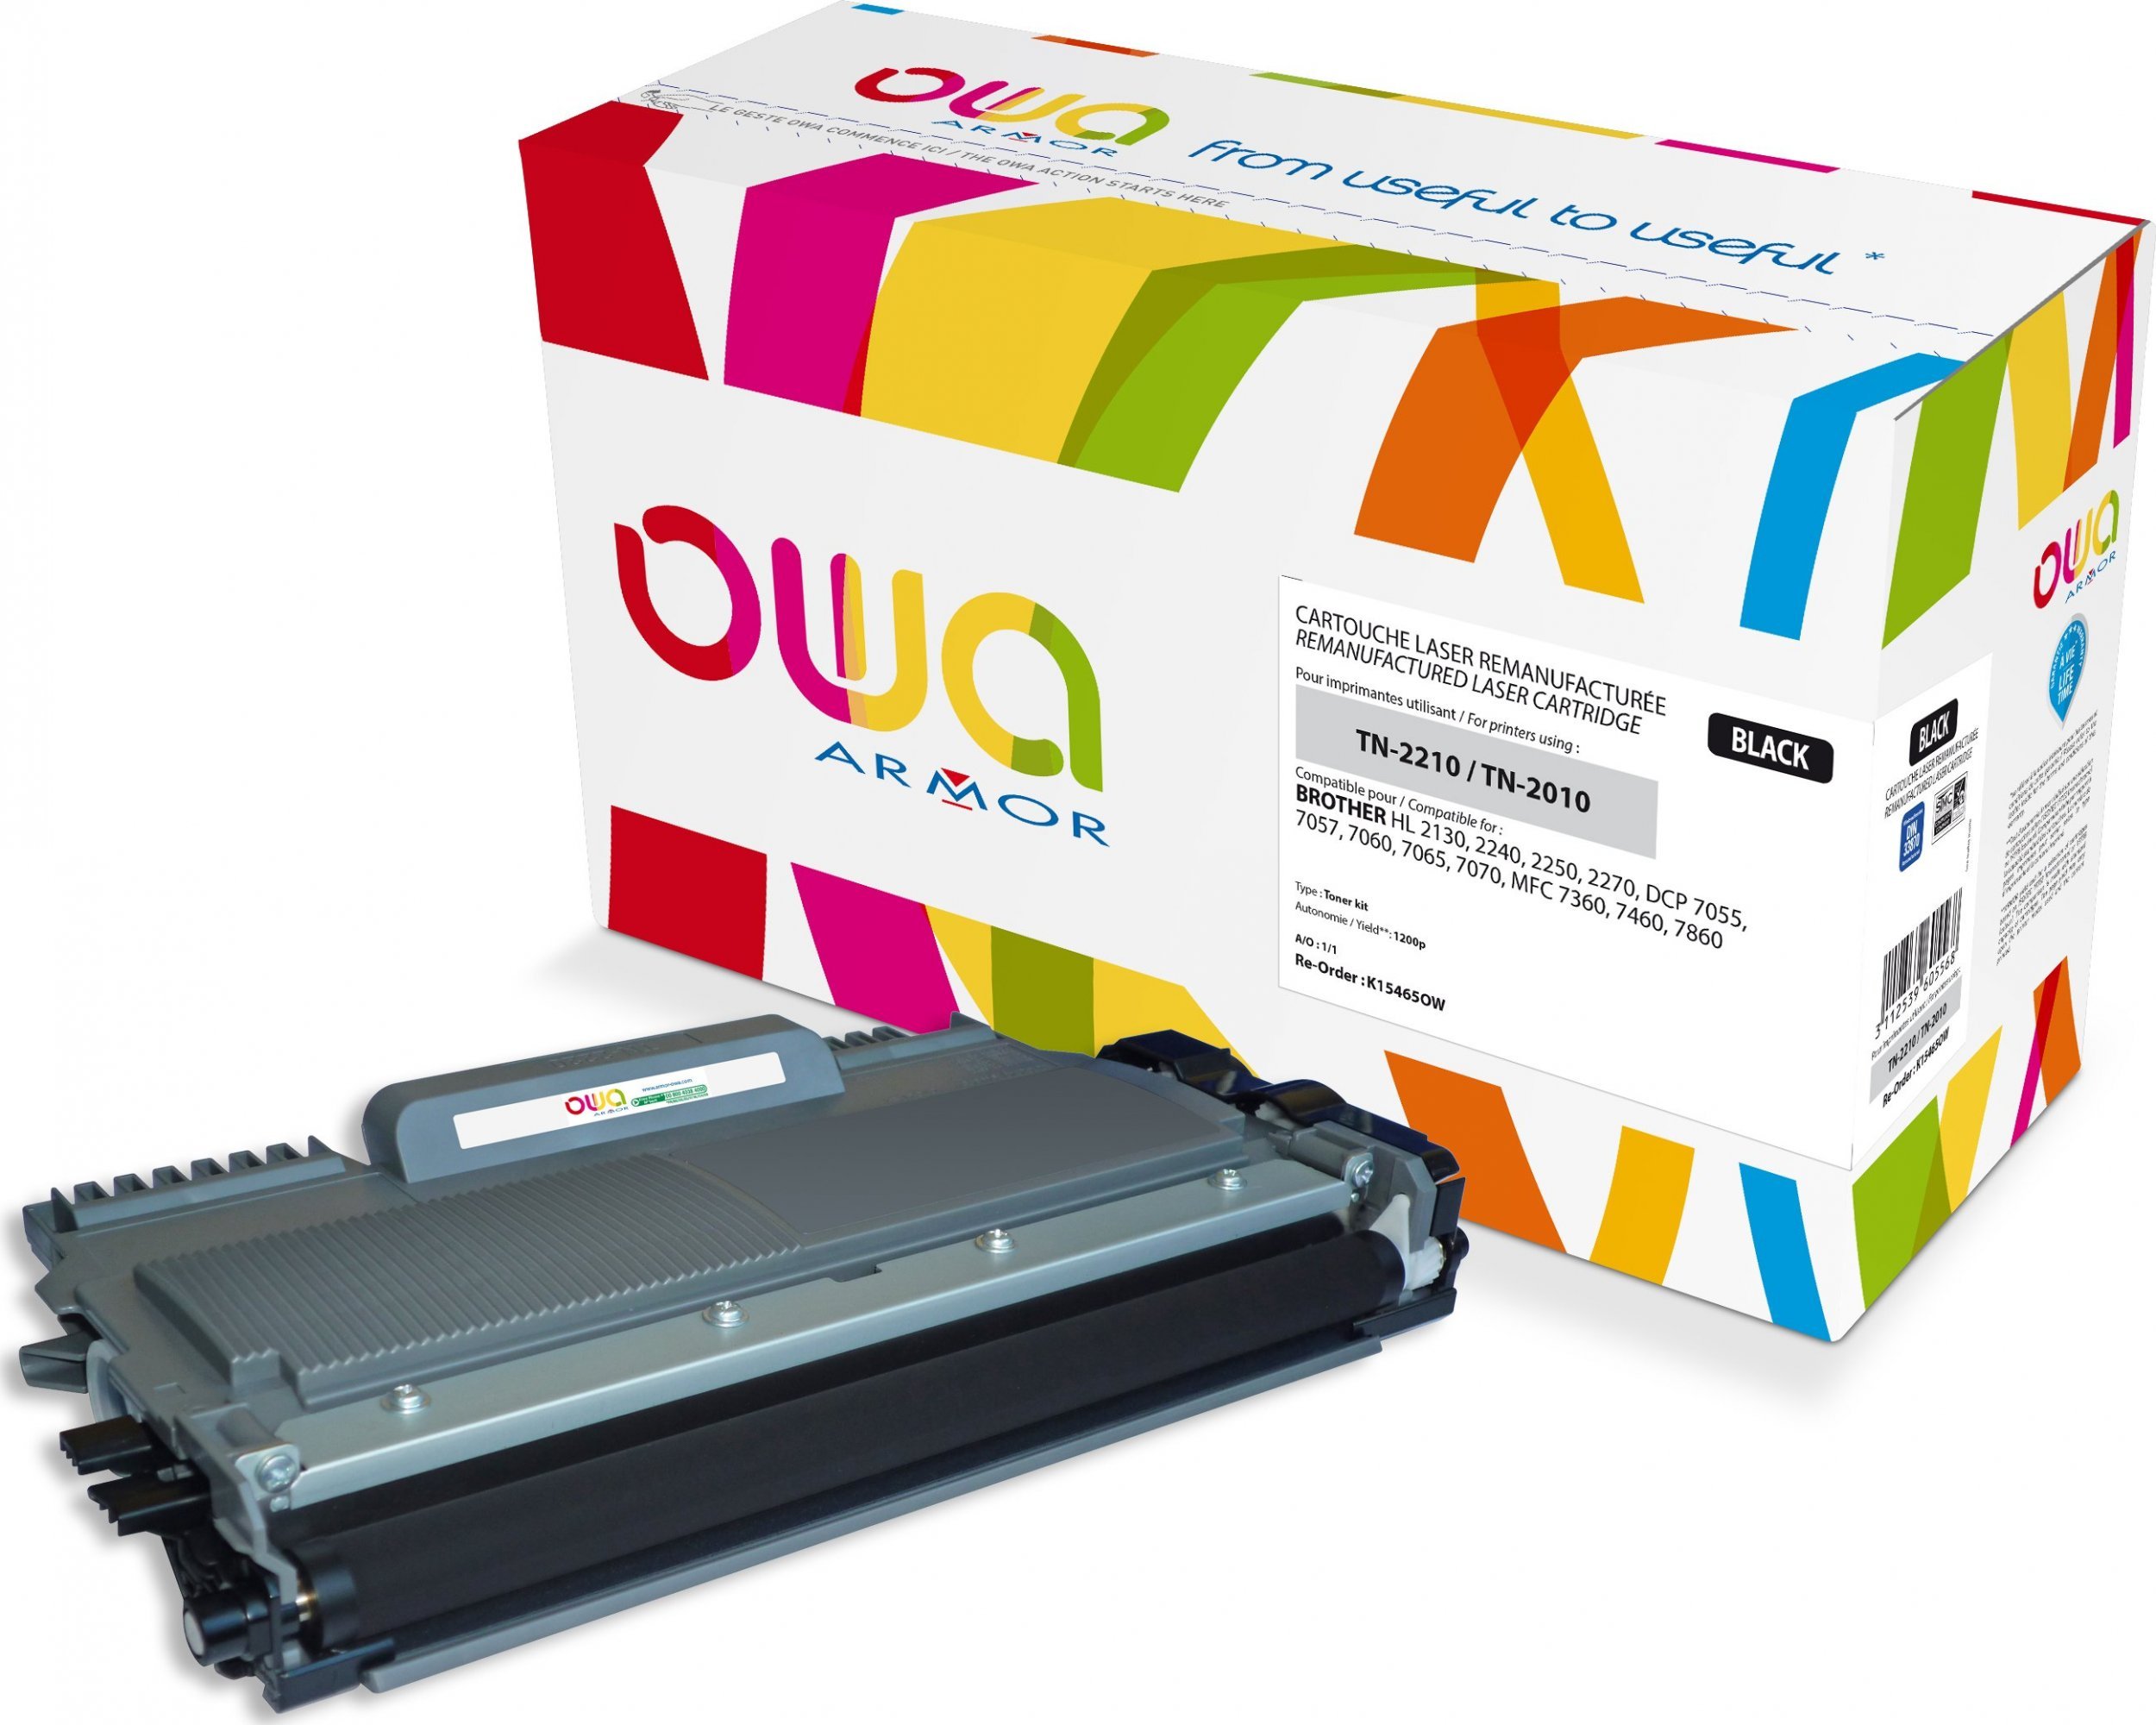 Toner OWA Armor Armor OWA - Black - Remanufactured - Toner Cartridge (Alternative to: Brother TN2210) - for Brother DCP-7060, 7065, 7070, HL-2240, 2250, 2270, MFC-7360, 7460, 7860, FAX-2840, 2940 (K15465OW)